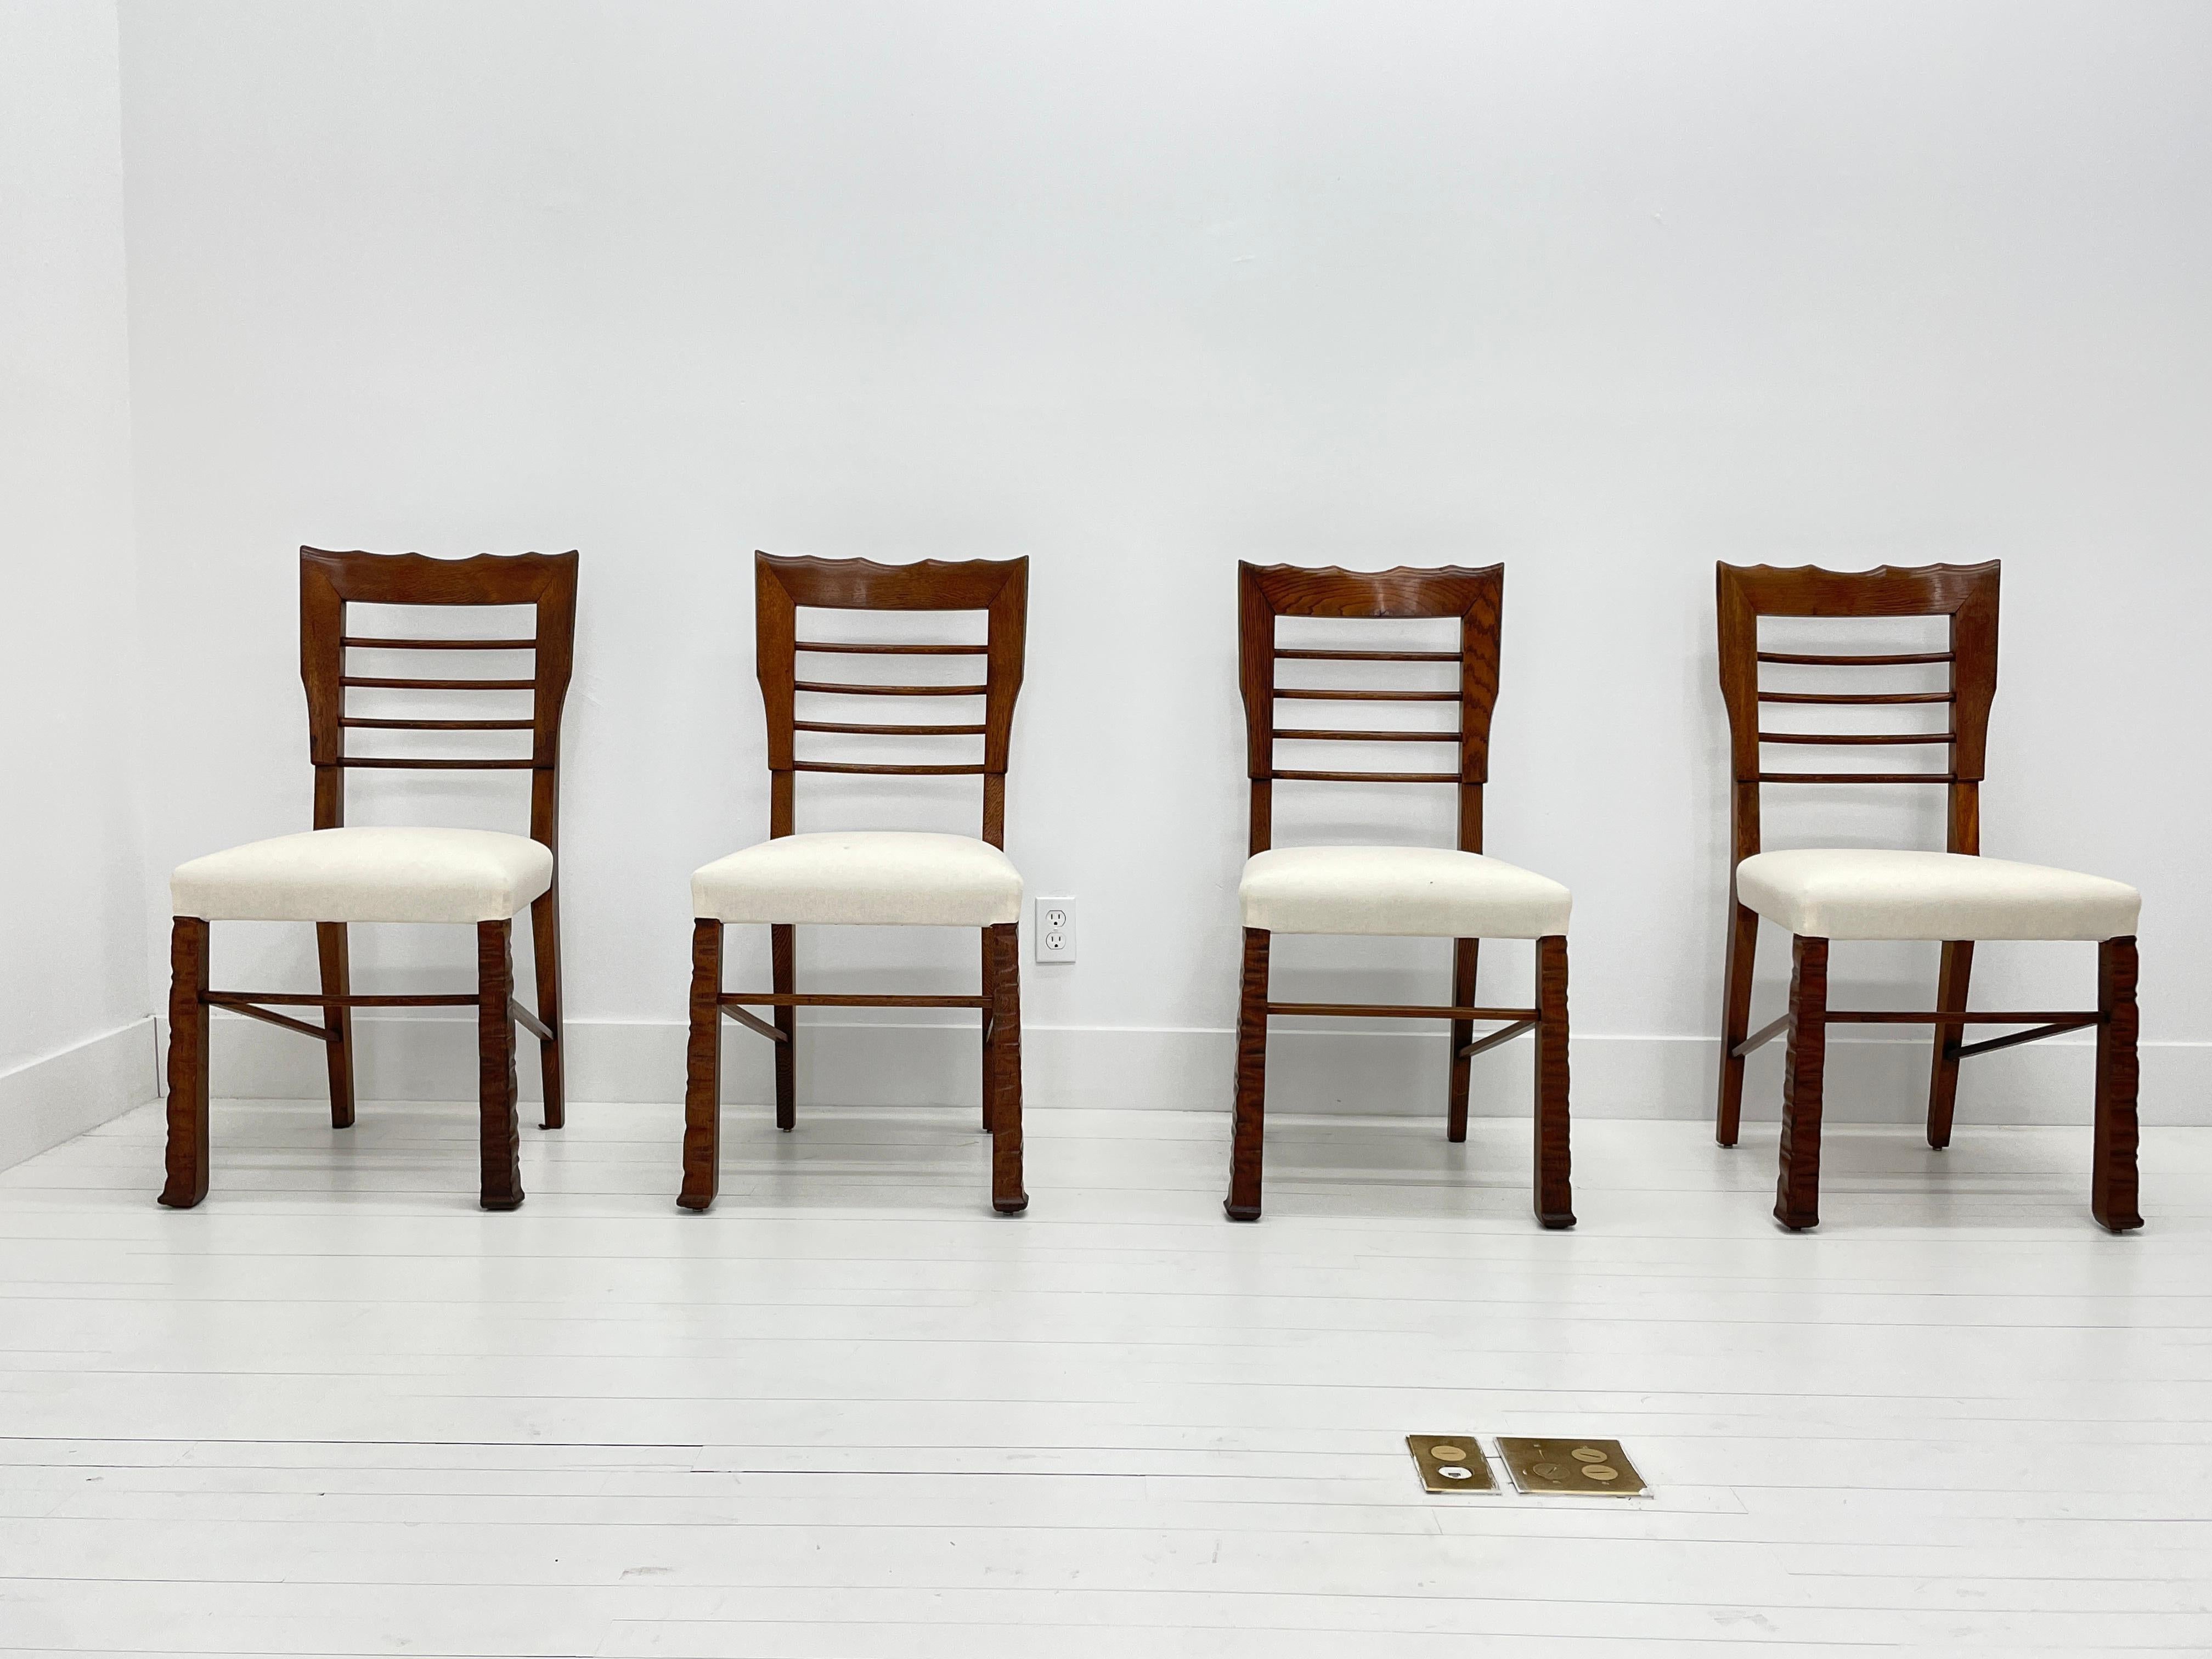 Hand-Carved Rustic Scalloped Edge Dining Chairs, Set of 10, Italy, 1940's For Sale